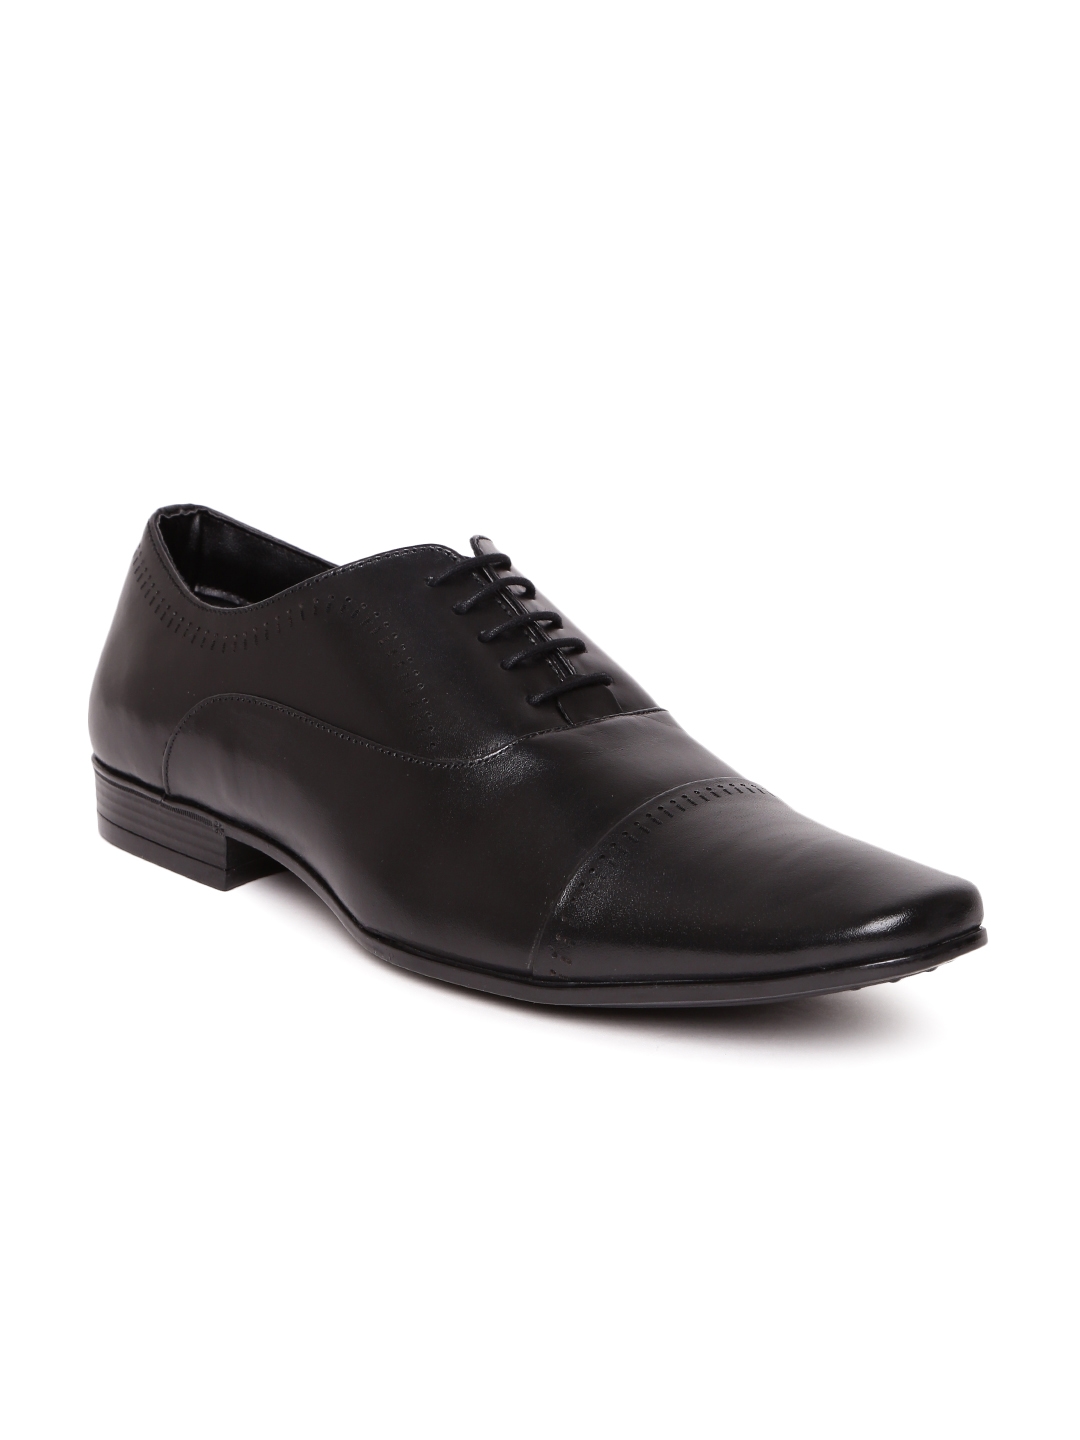 Men Black Leather Formal Oxfords by Bata- The evergreen stylish formal shoes